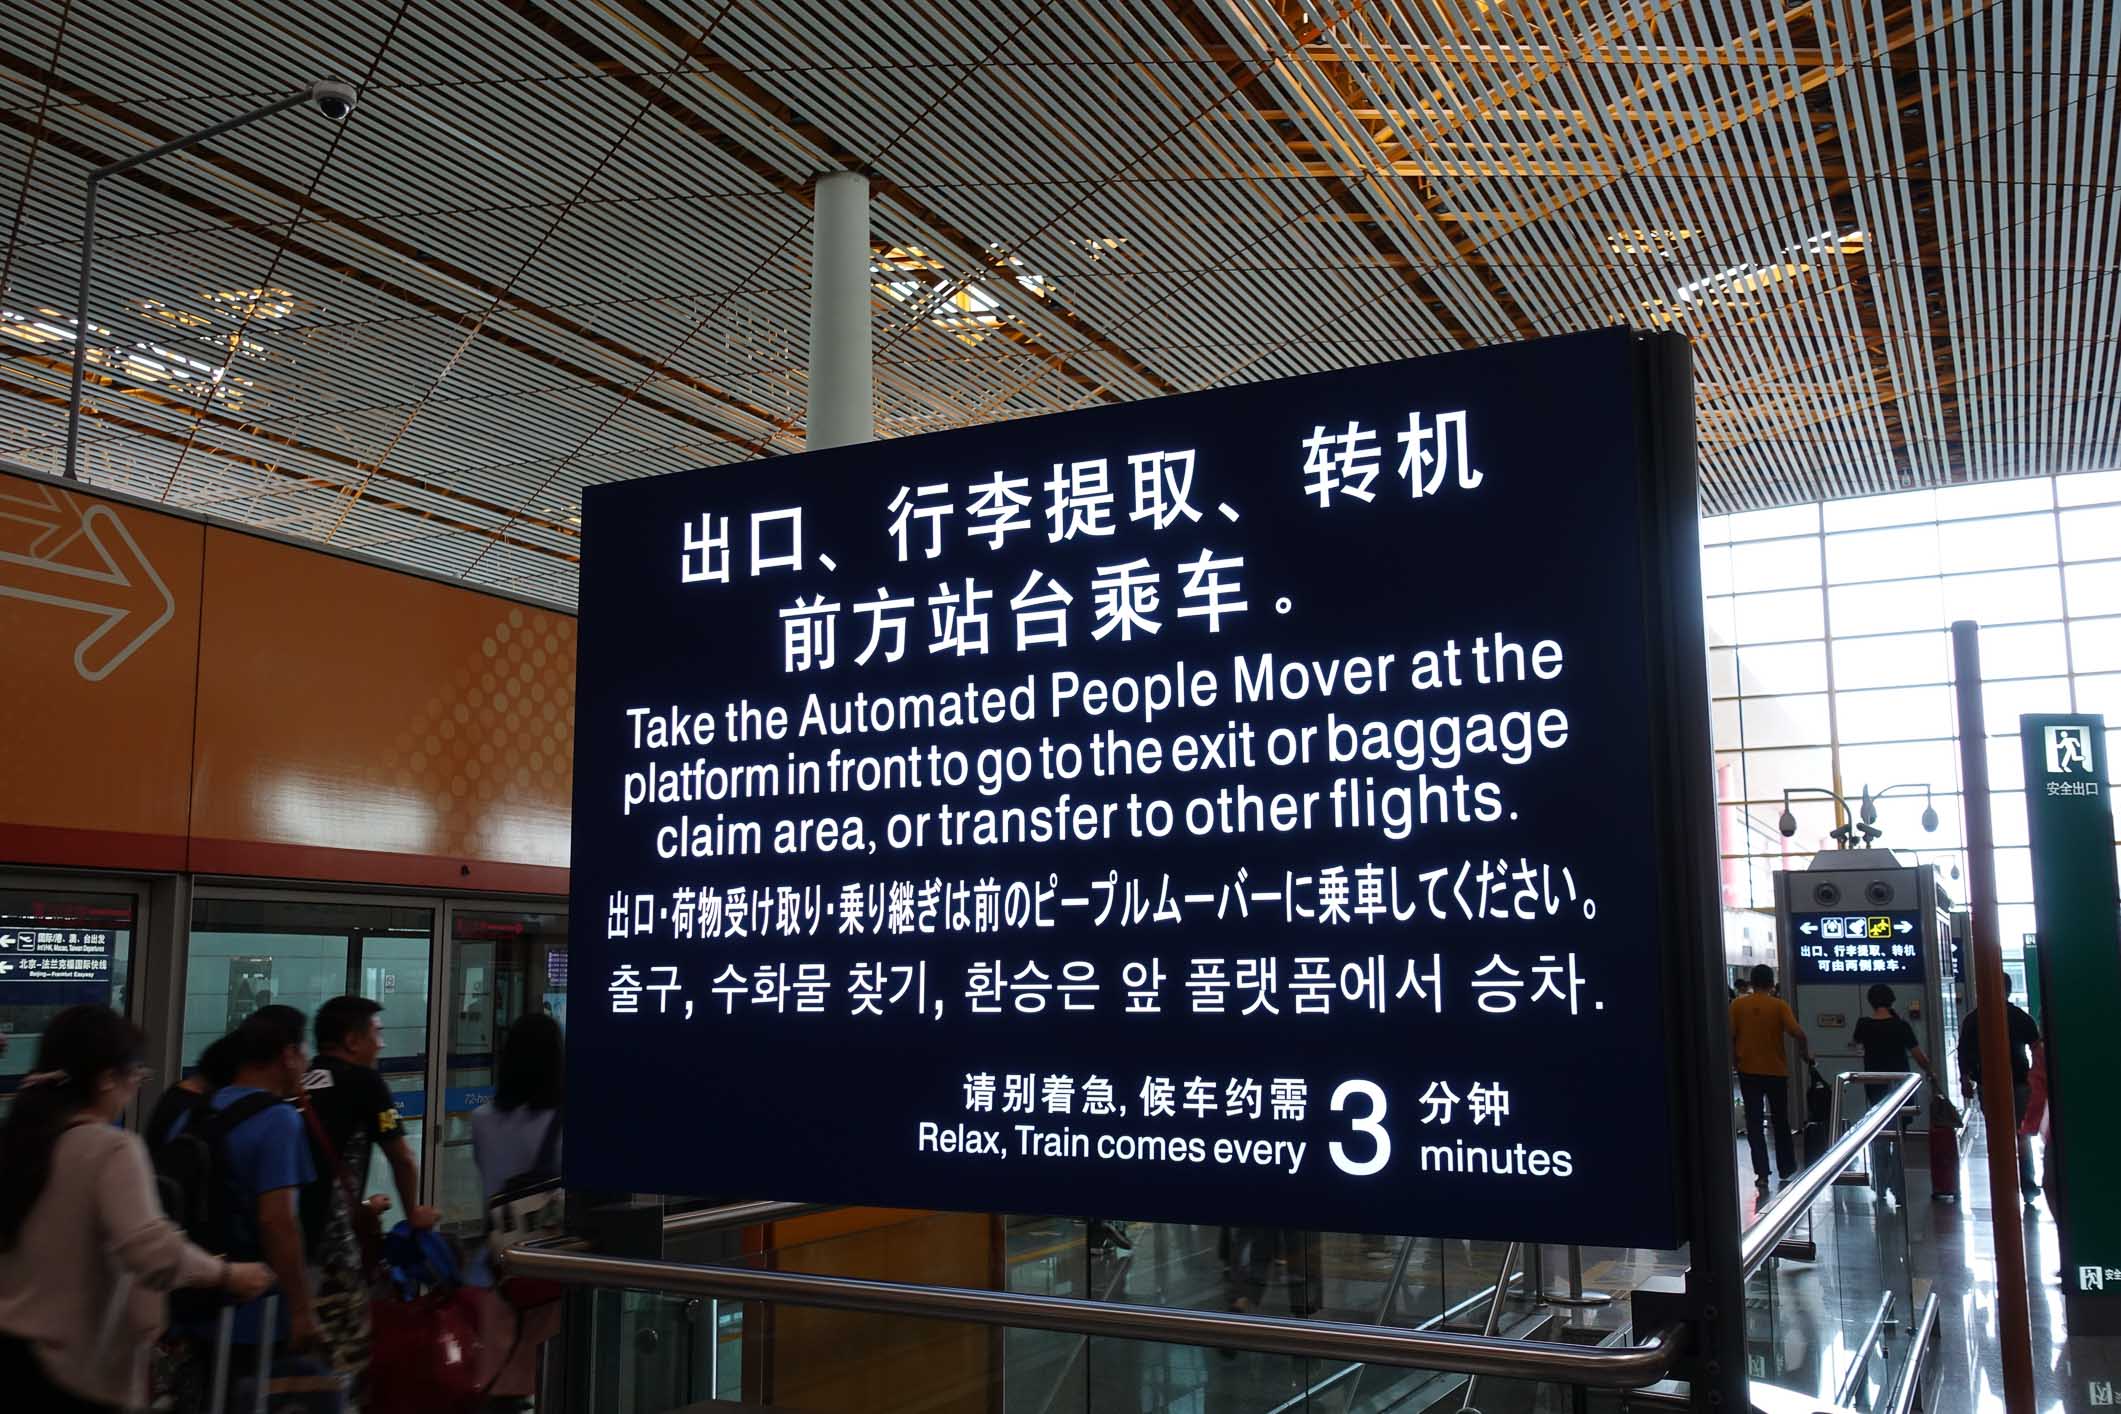 Funny signs in China